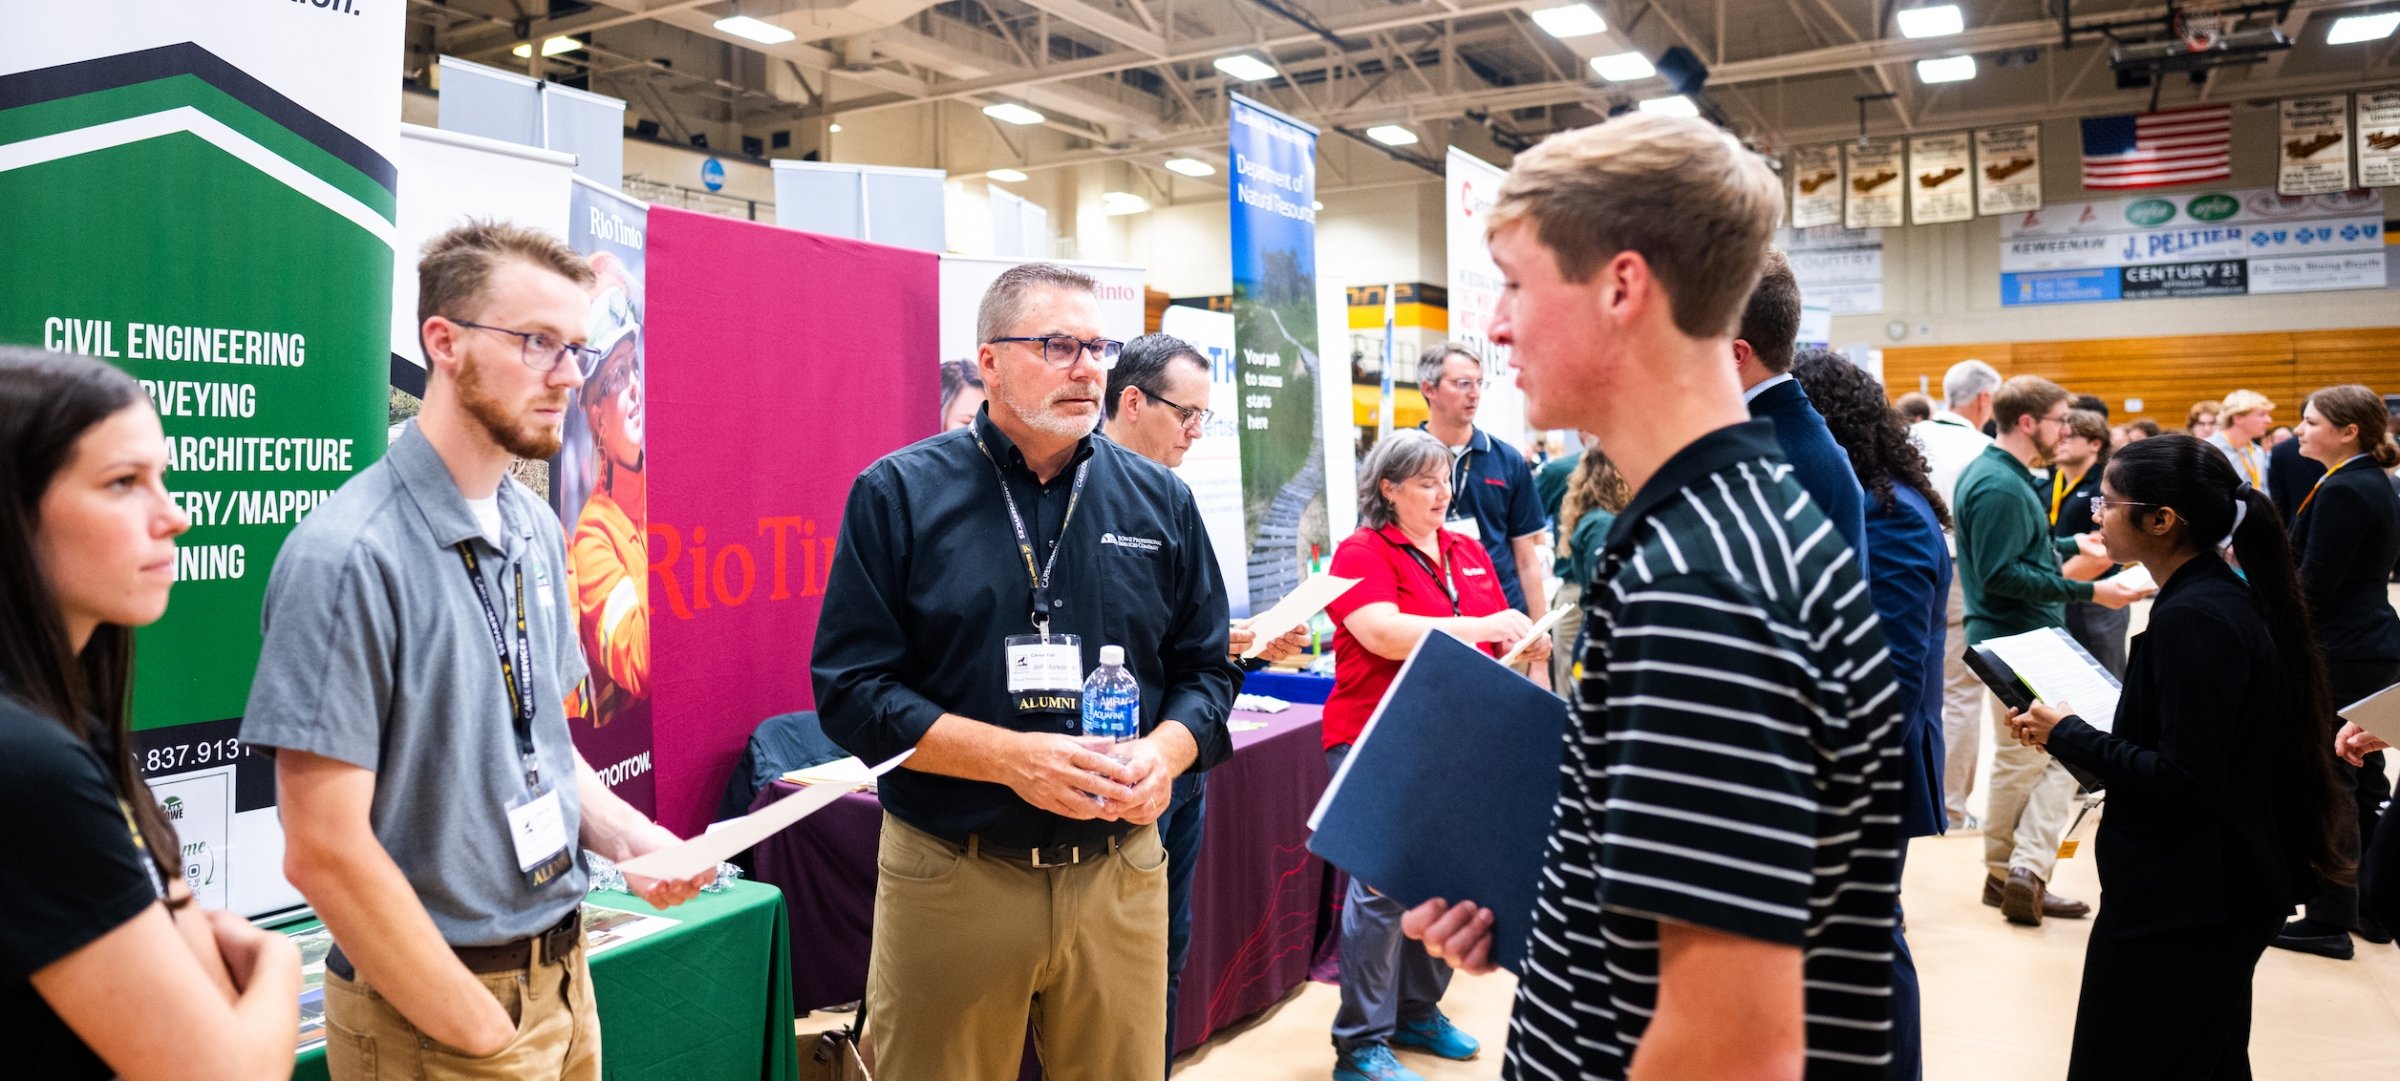 Students meet with industry representatives at Career Fair.